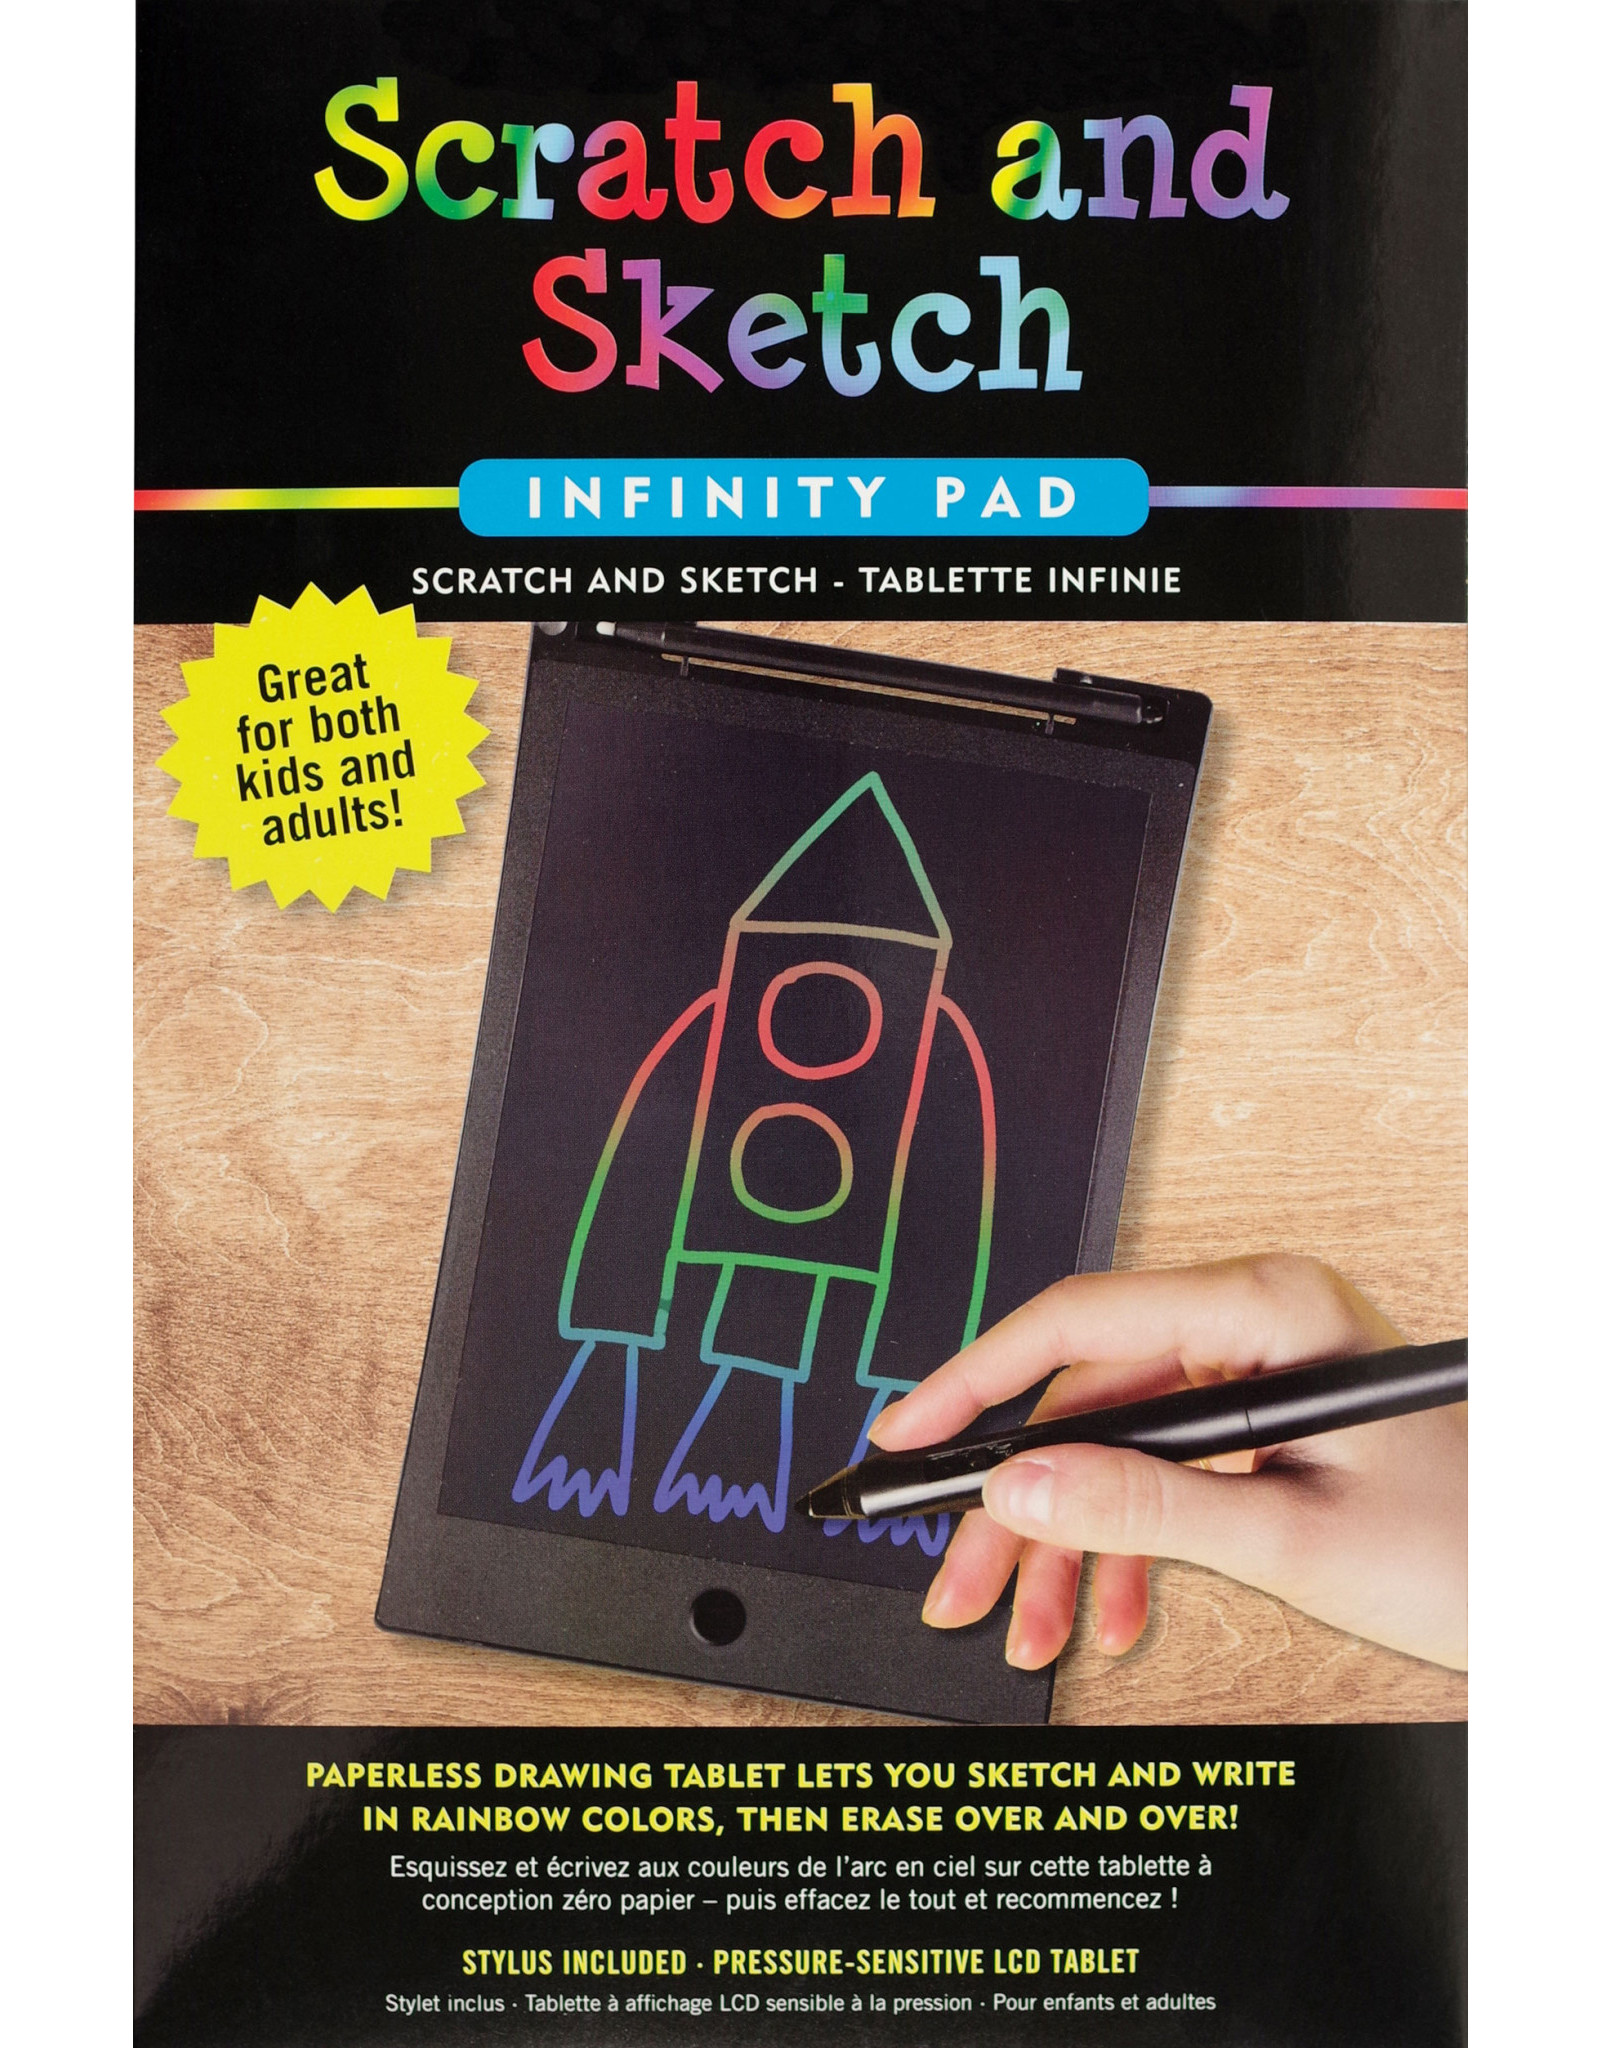 Scratch & Sketch Infinity Pad - Wit & Whimsy Toys